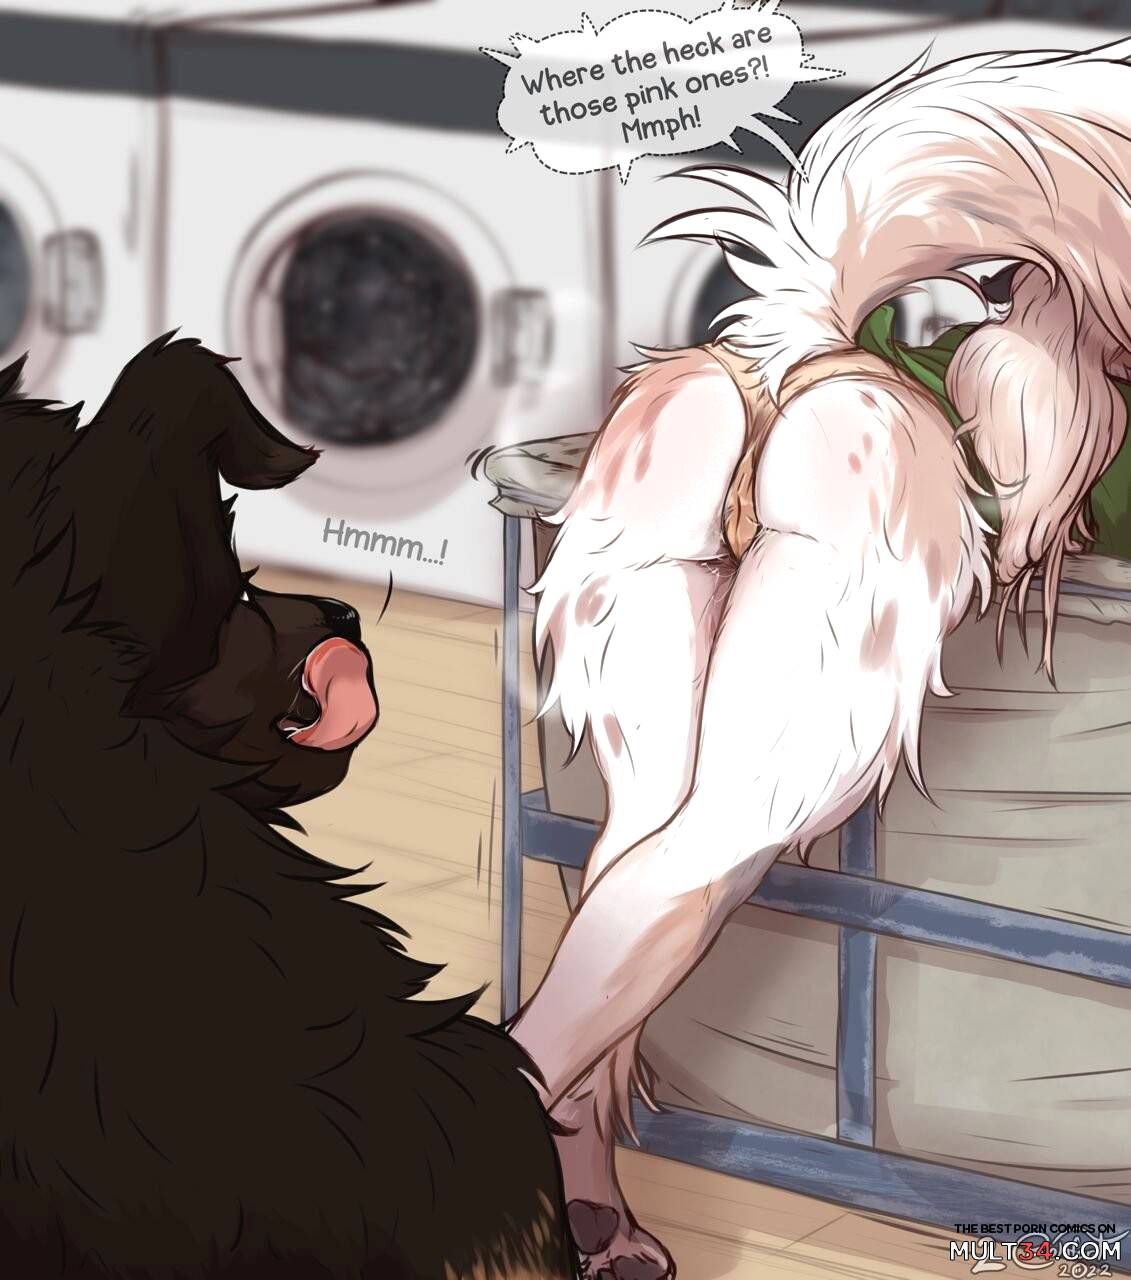 Heat in the Laundromat page 2